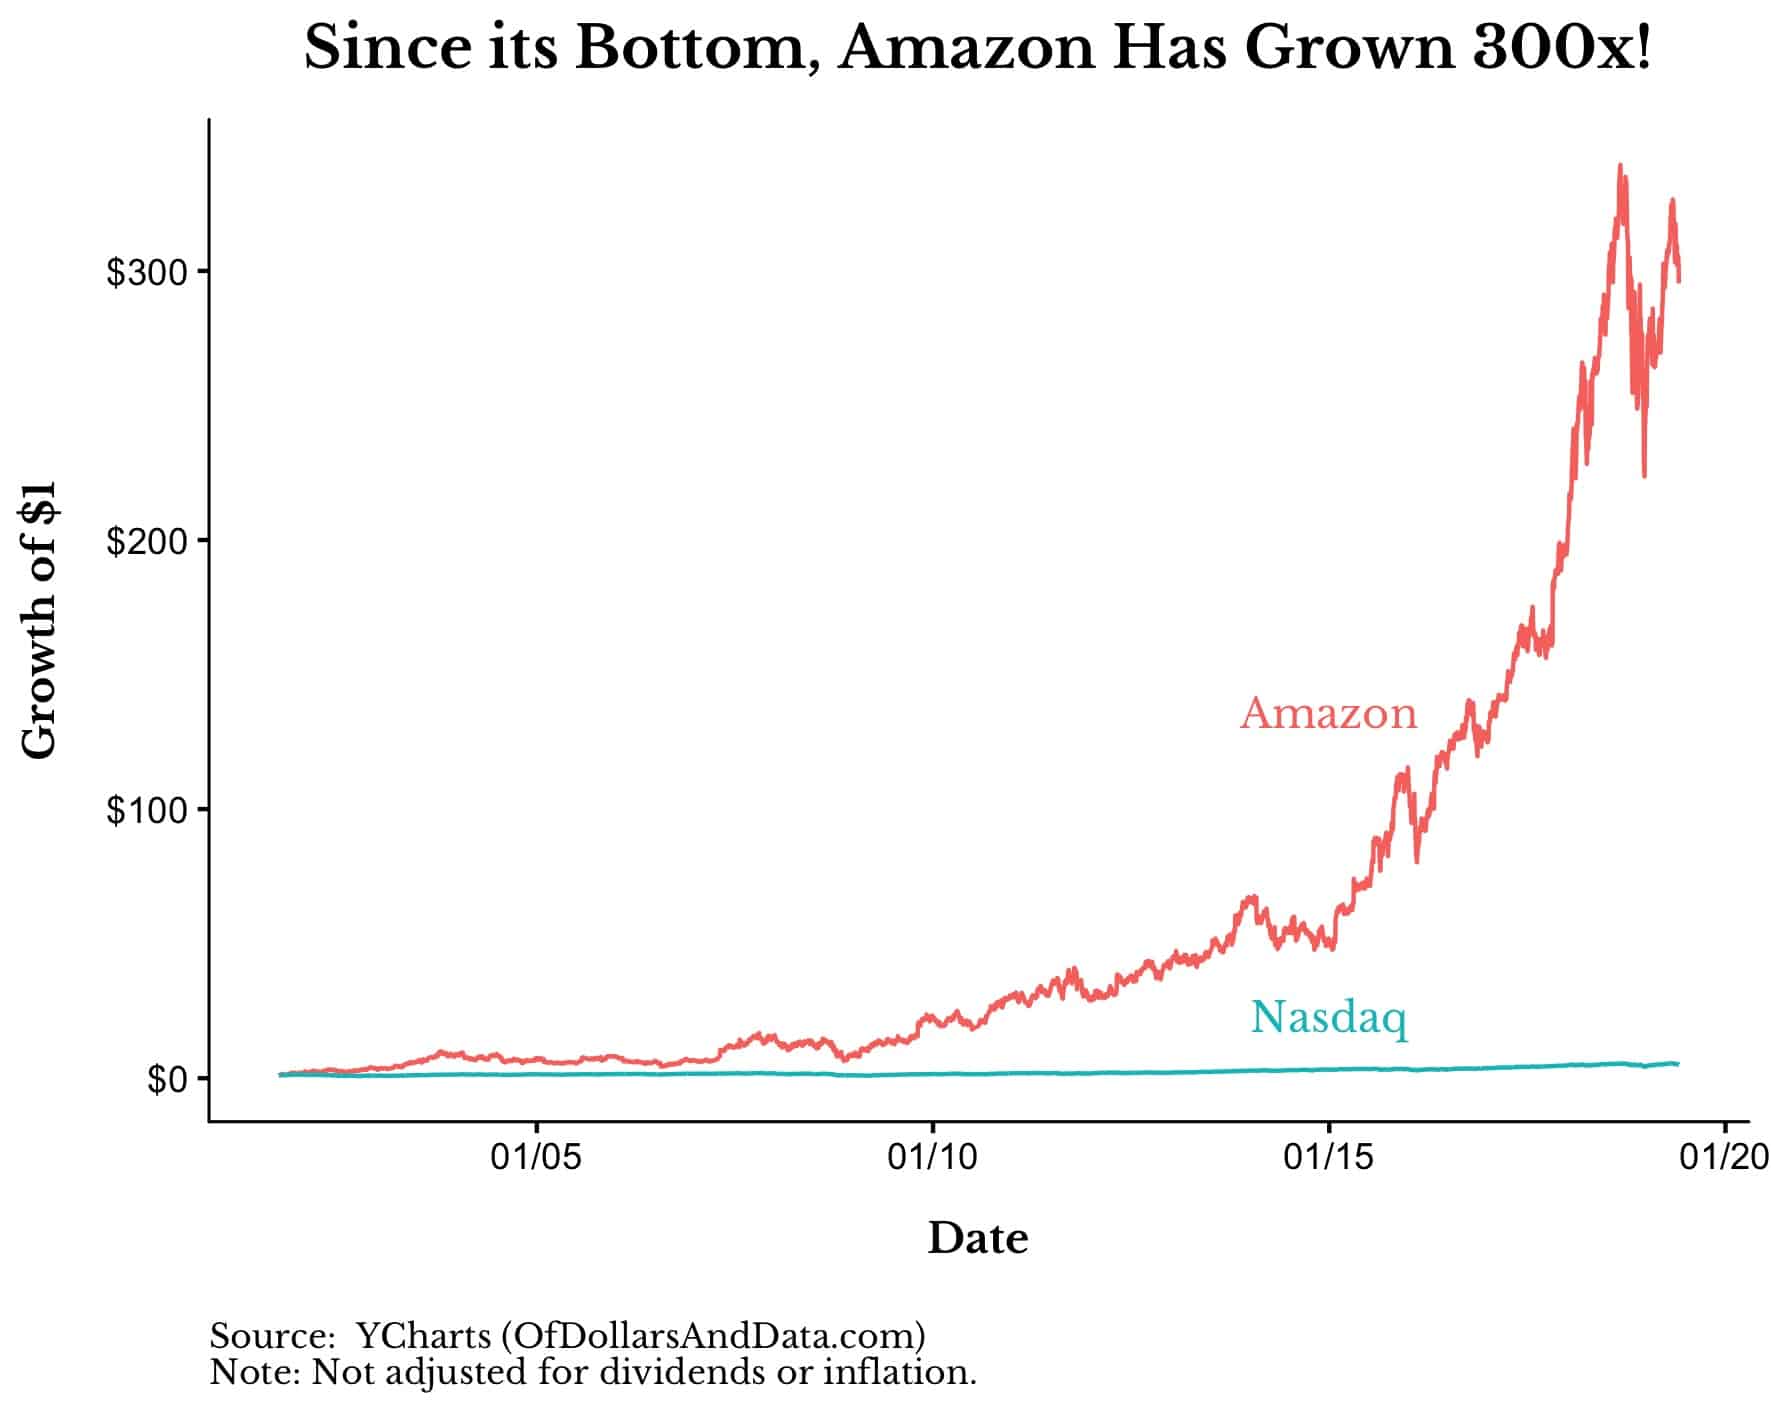 Amazon stock since its bottom in the early 2000s to 2020.